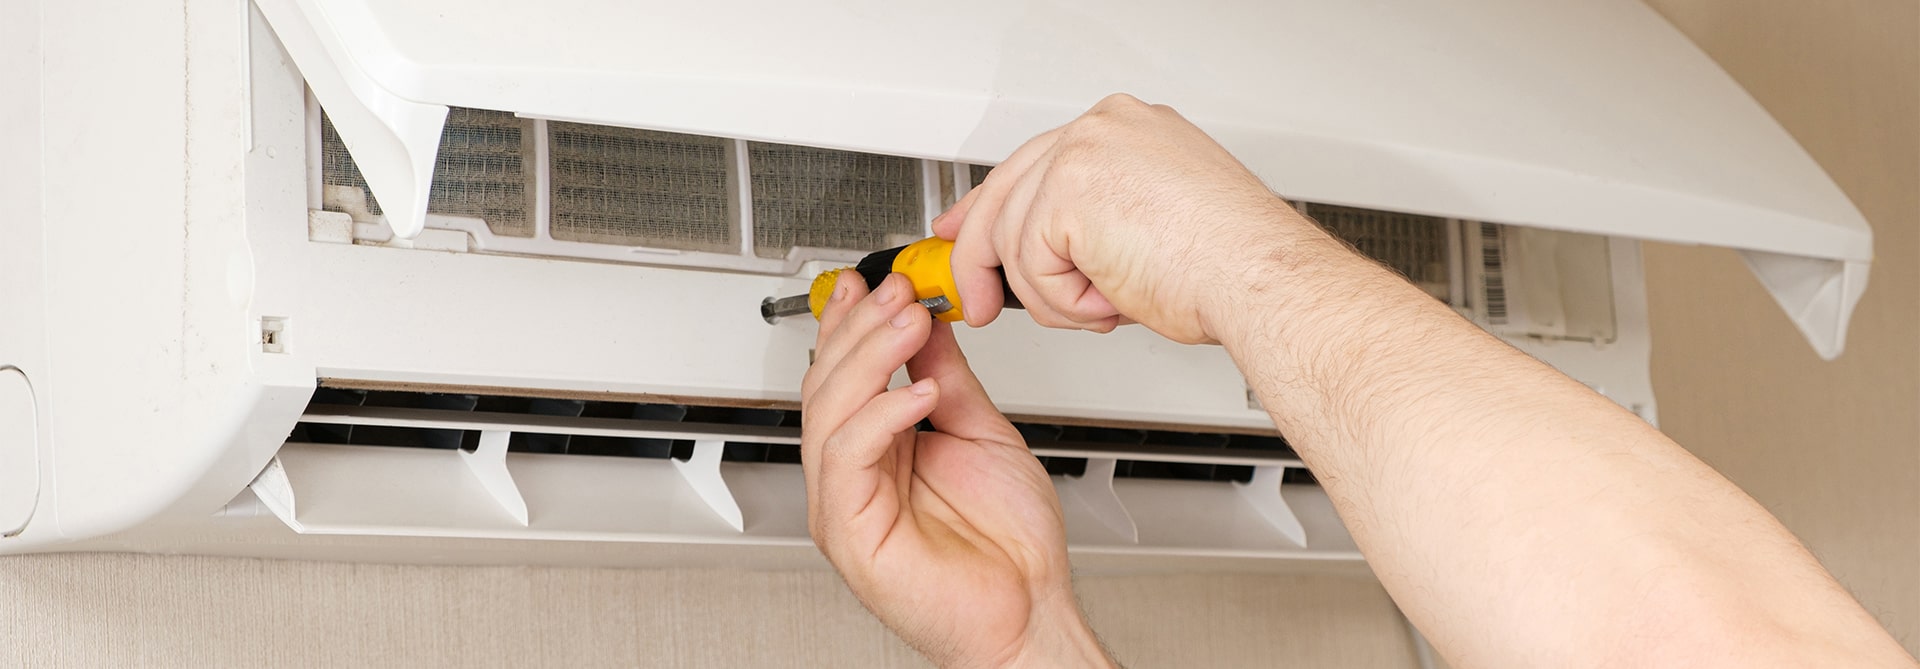 9 Mistakes To Avoid When Installing Your Aircon